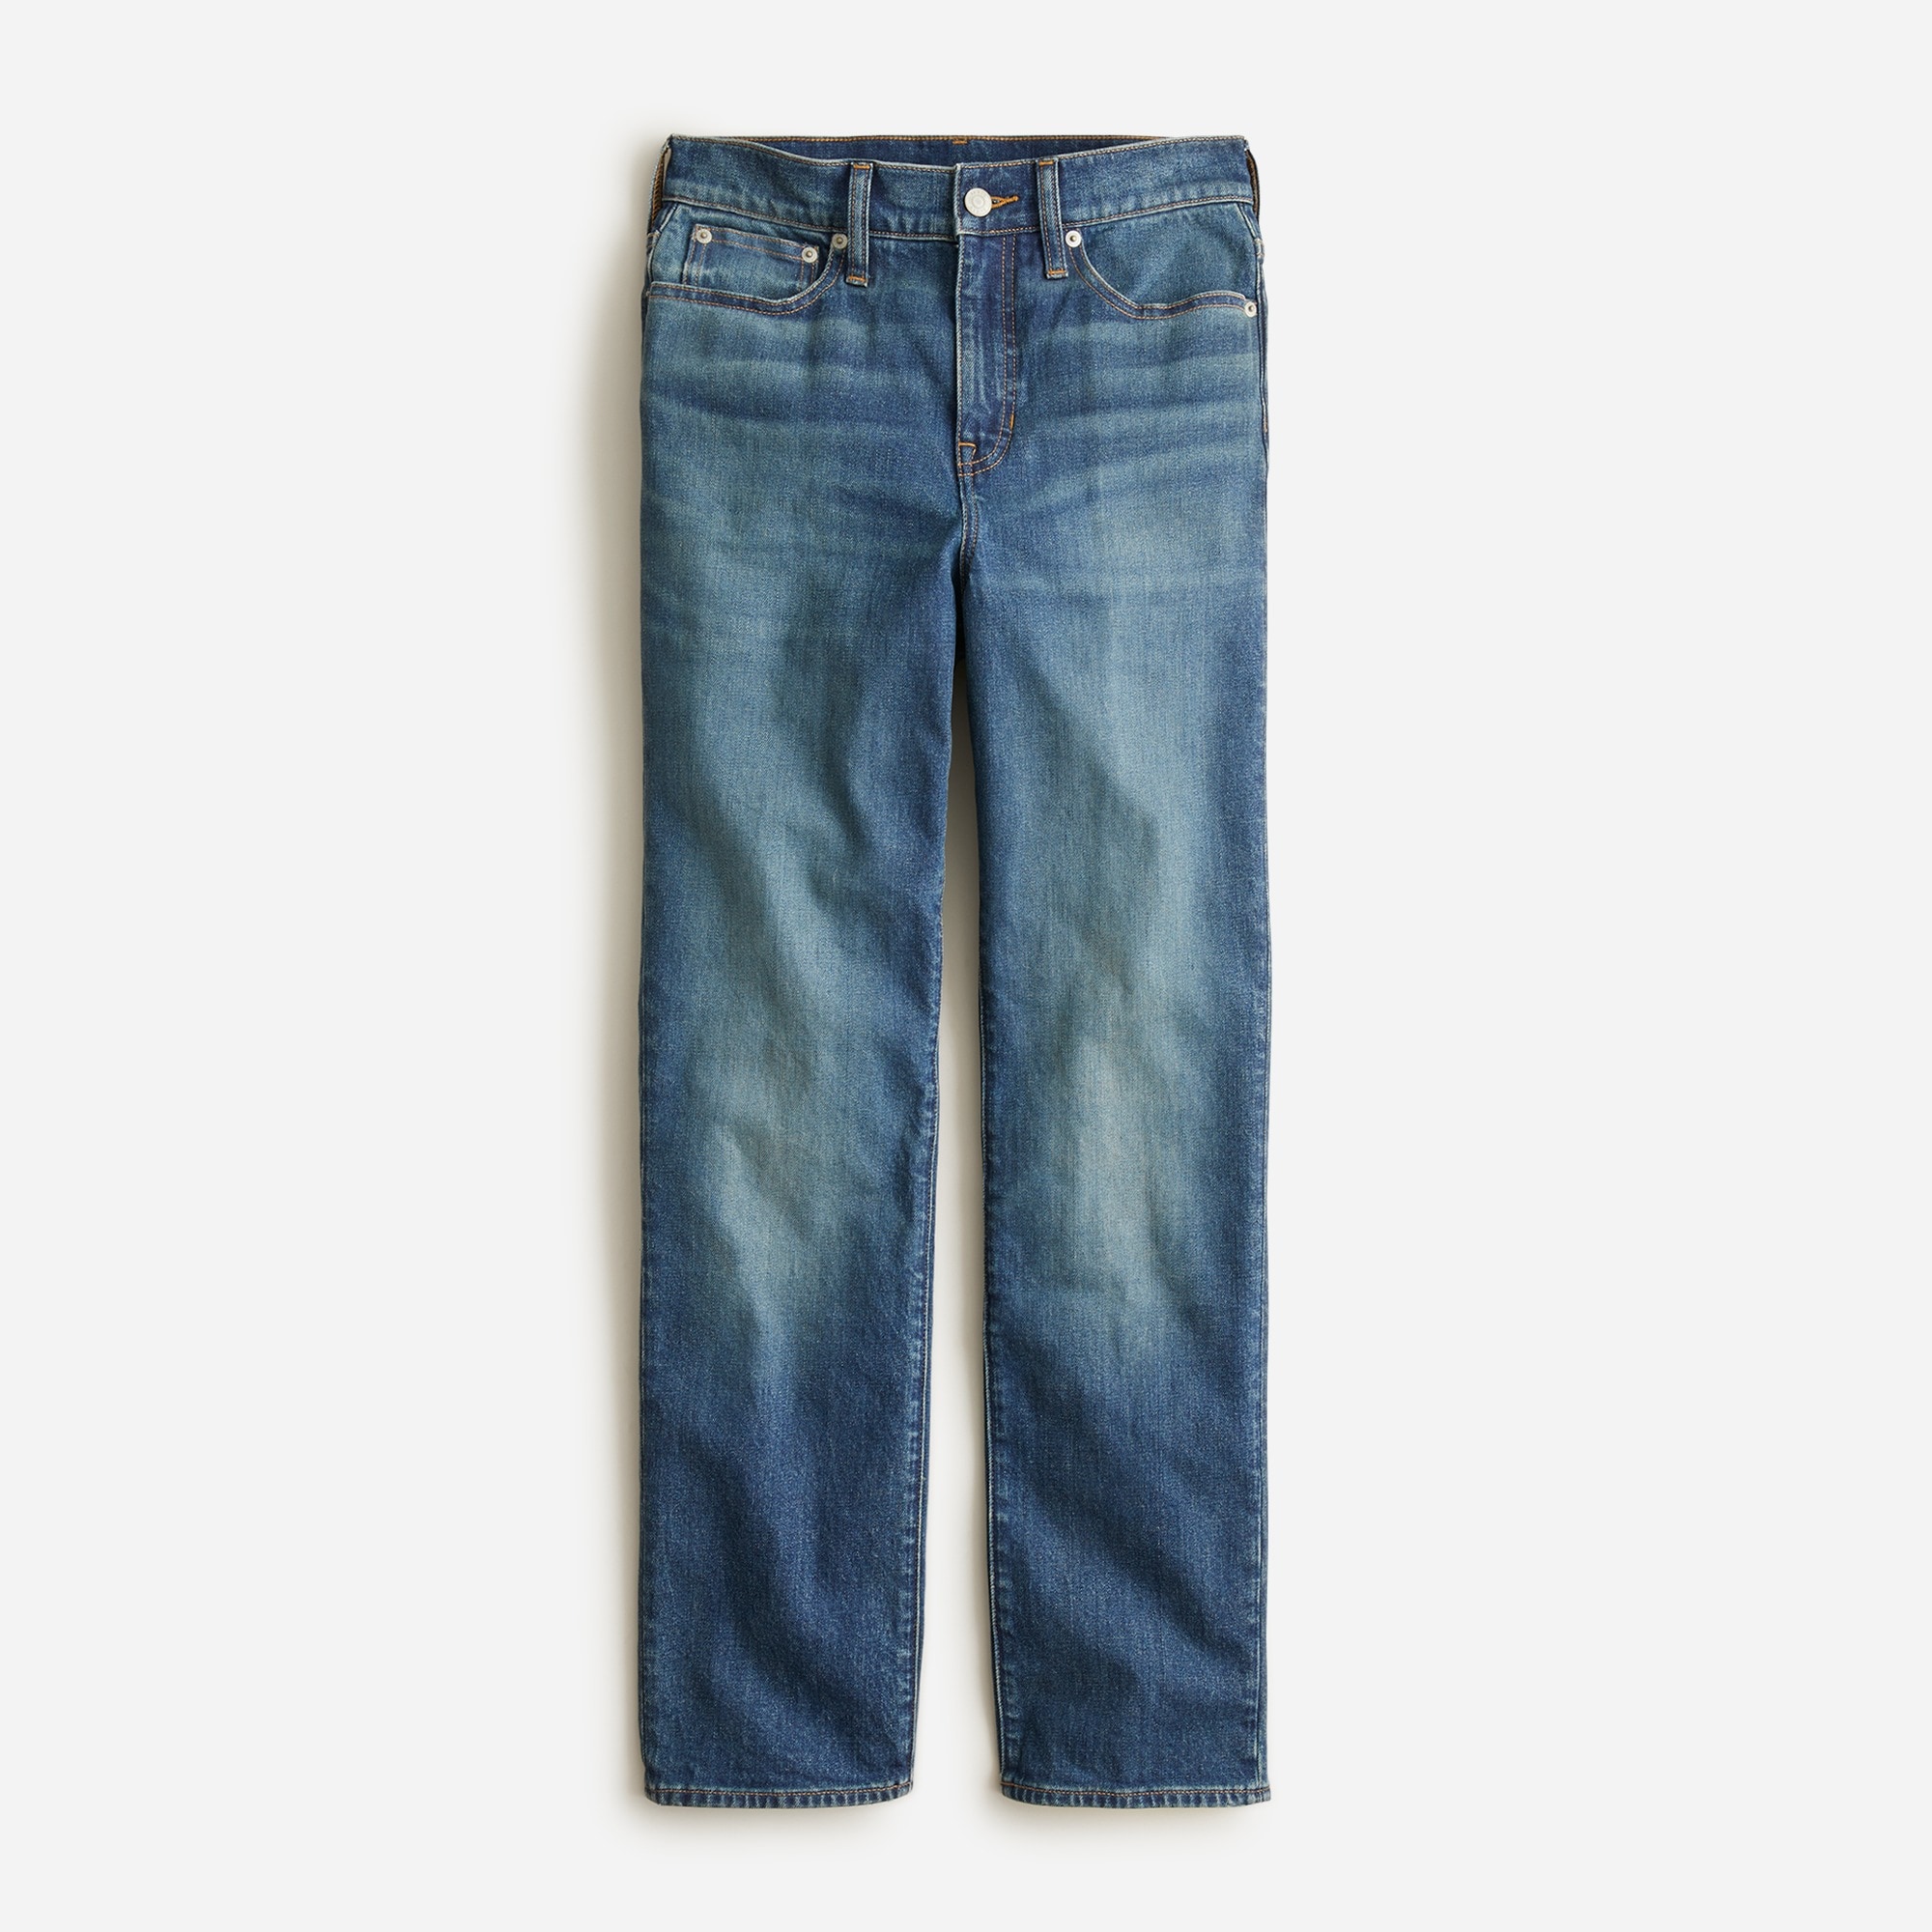  Classic Relaxed-fit jean in two-year wash